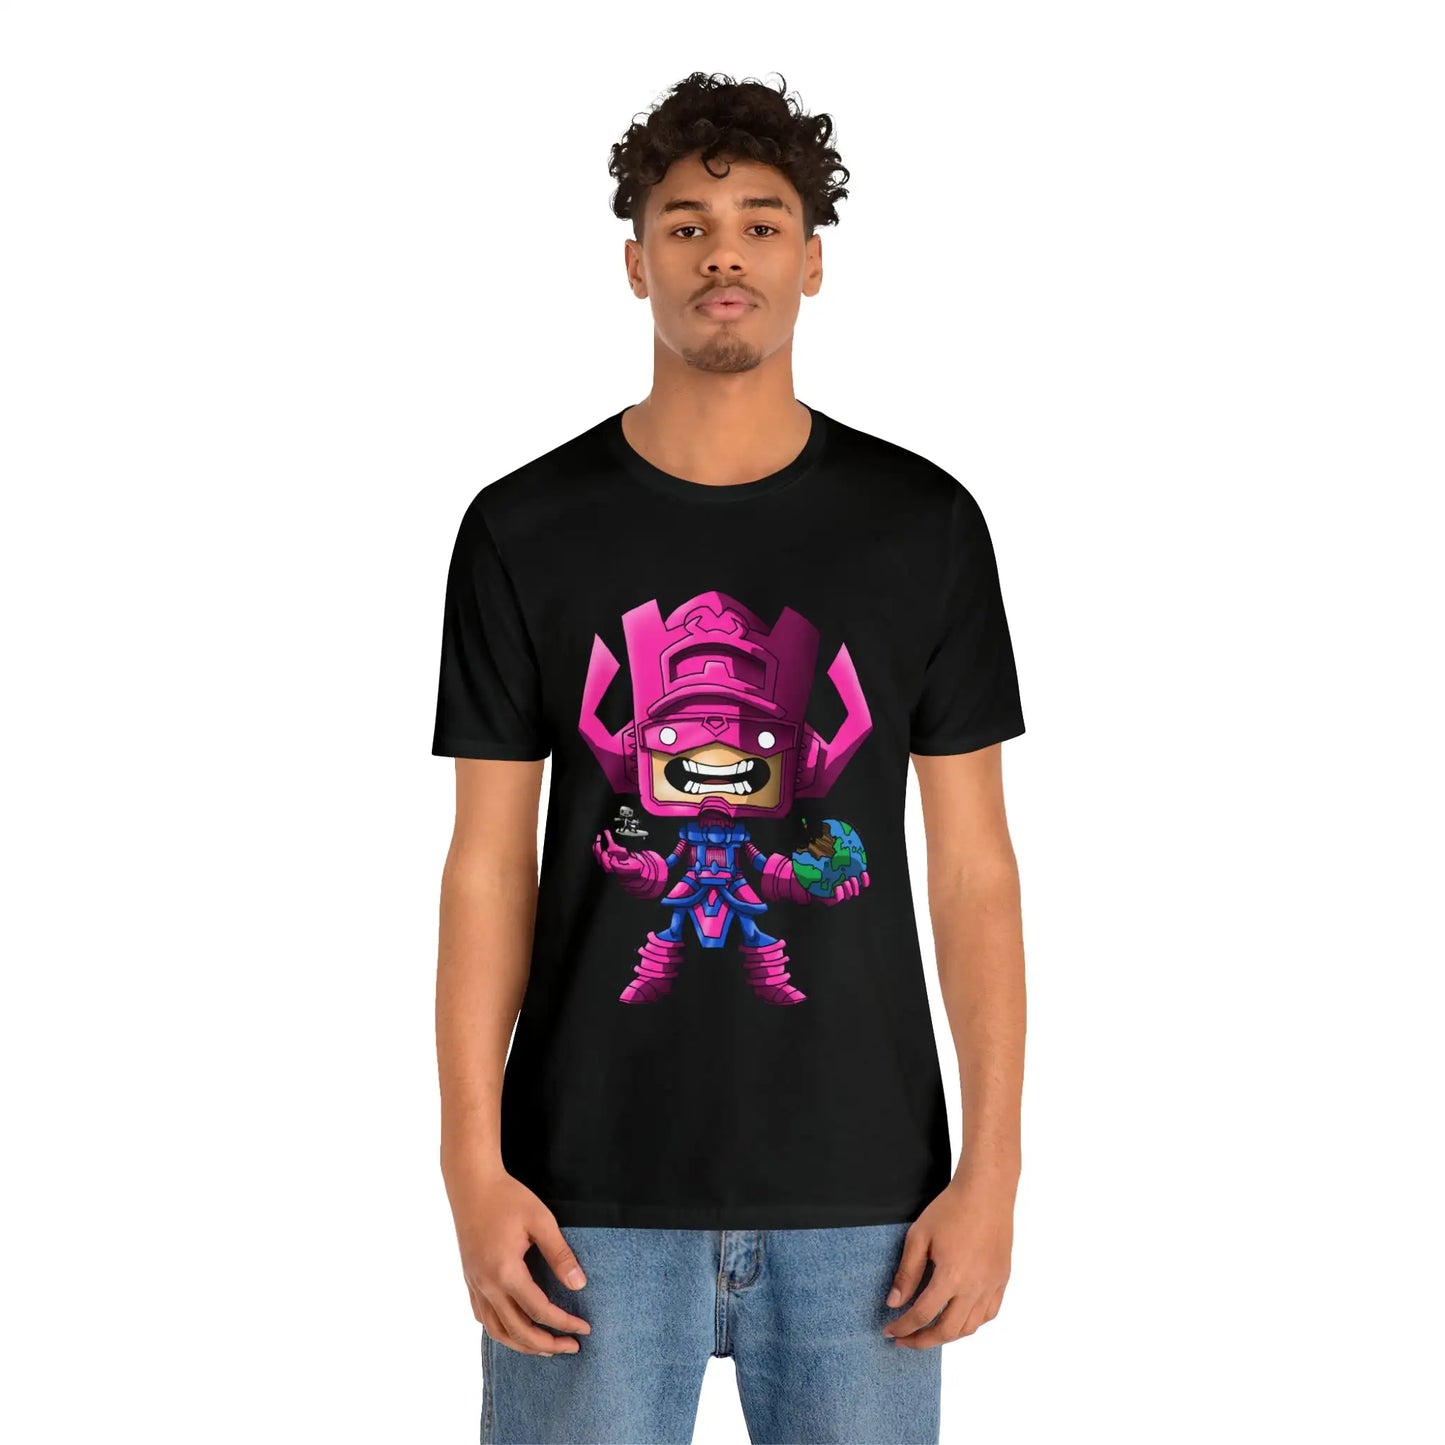 Galactus and Silver Surfer T-Shirt Cartoon Planet Devourer Chibi Style Gift Tee Unisex For Men and Women